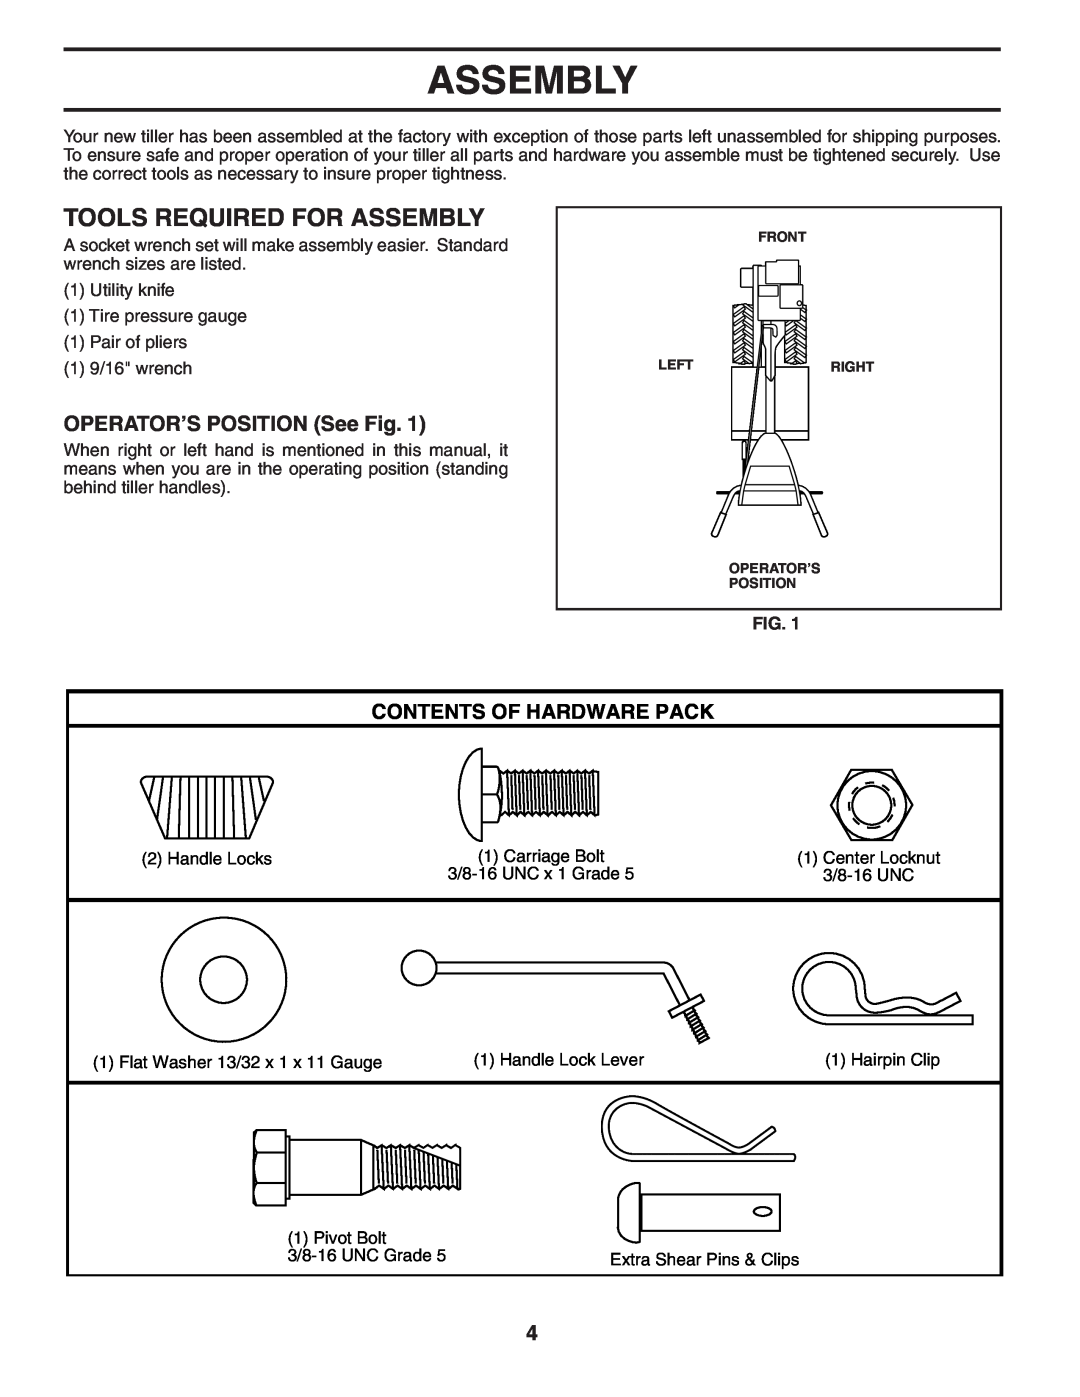 Poulan 96092000400 manual Tools Required For Assembly, OPERATOR’S POSITION See Fig, Contents Of Hardware Pack 